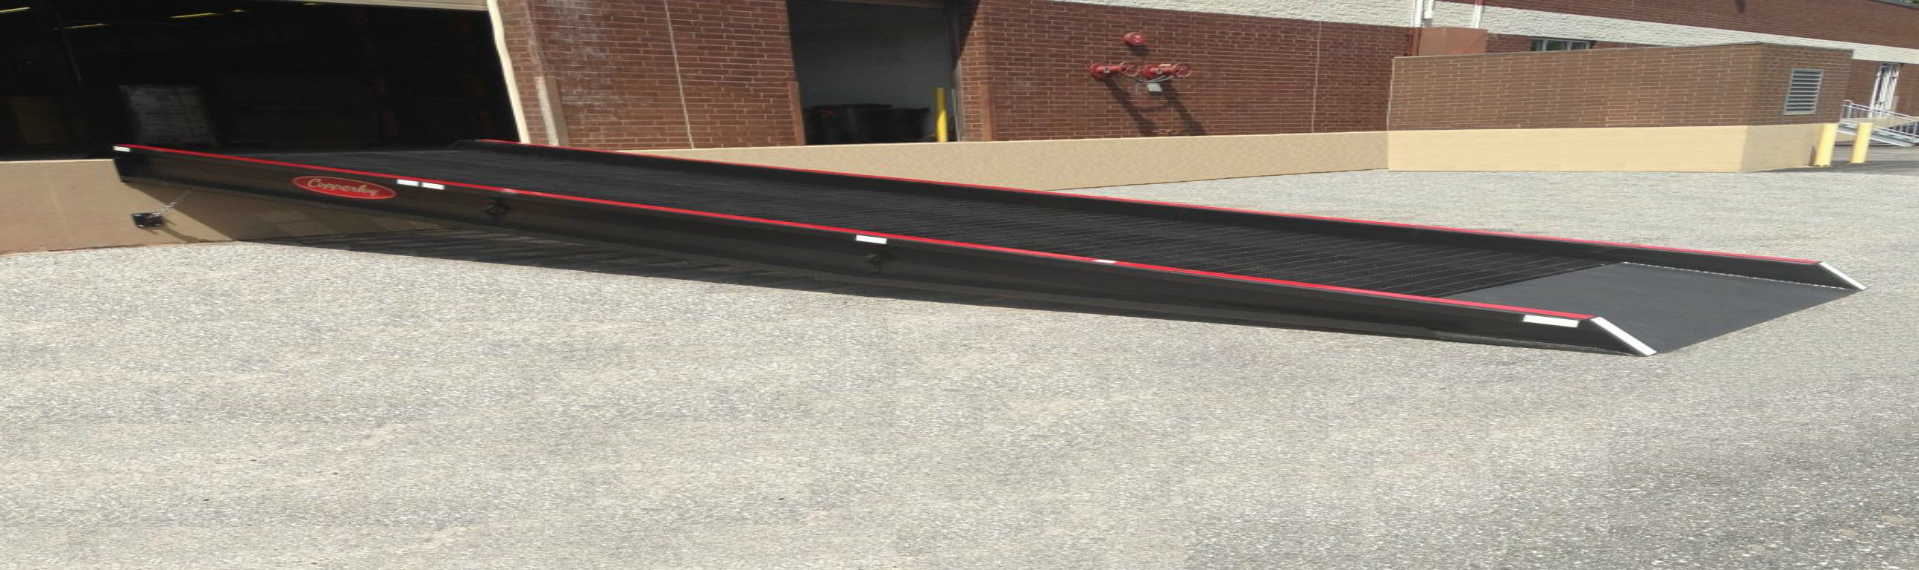 Dock to ground ramps - image of loading dock ramp